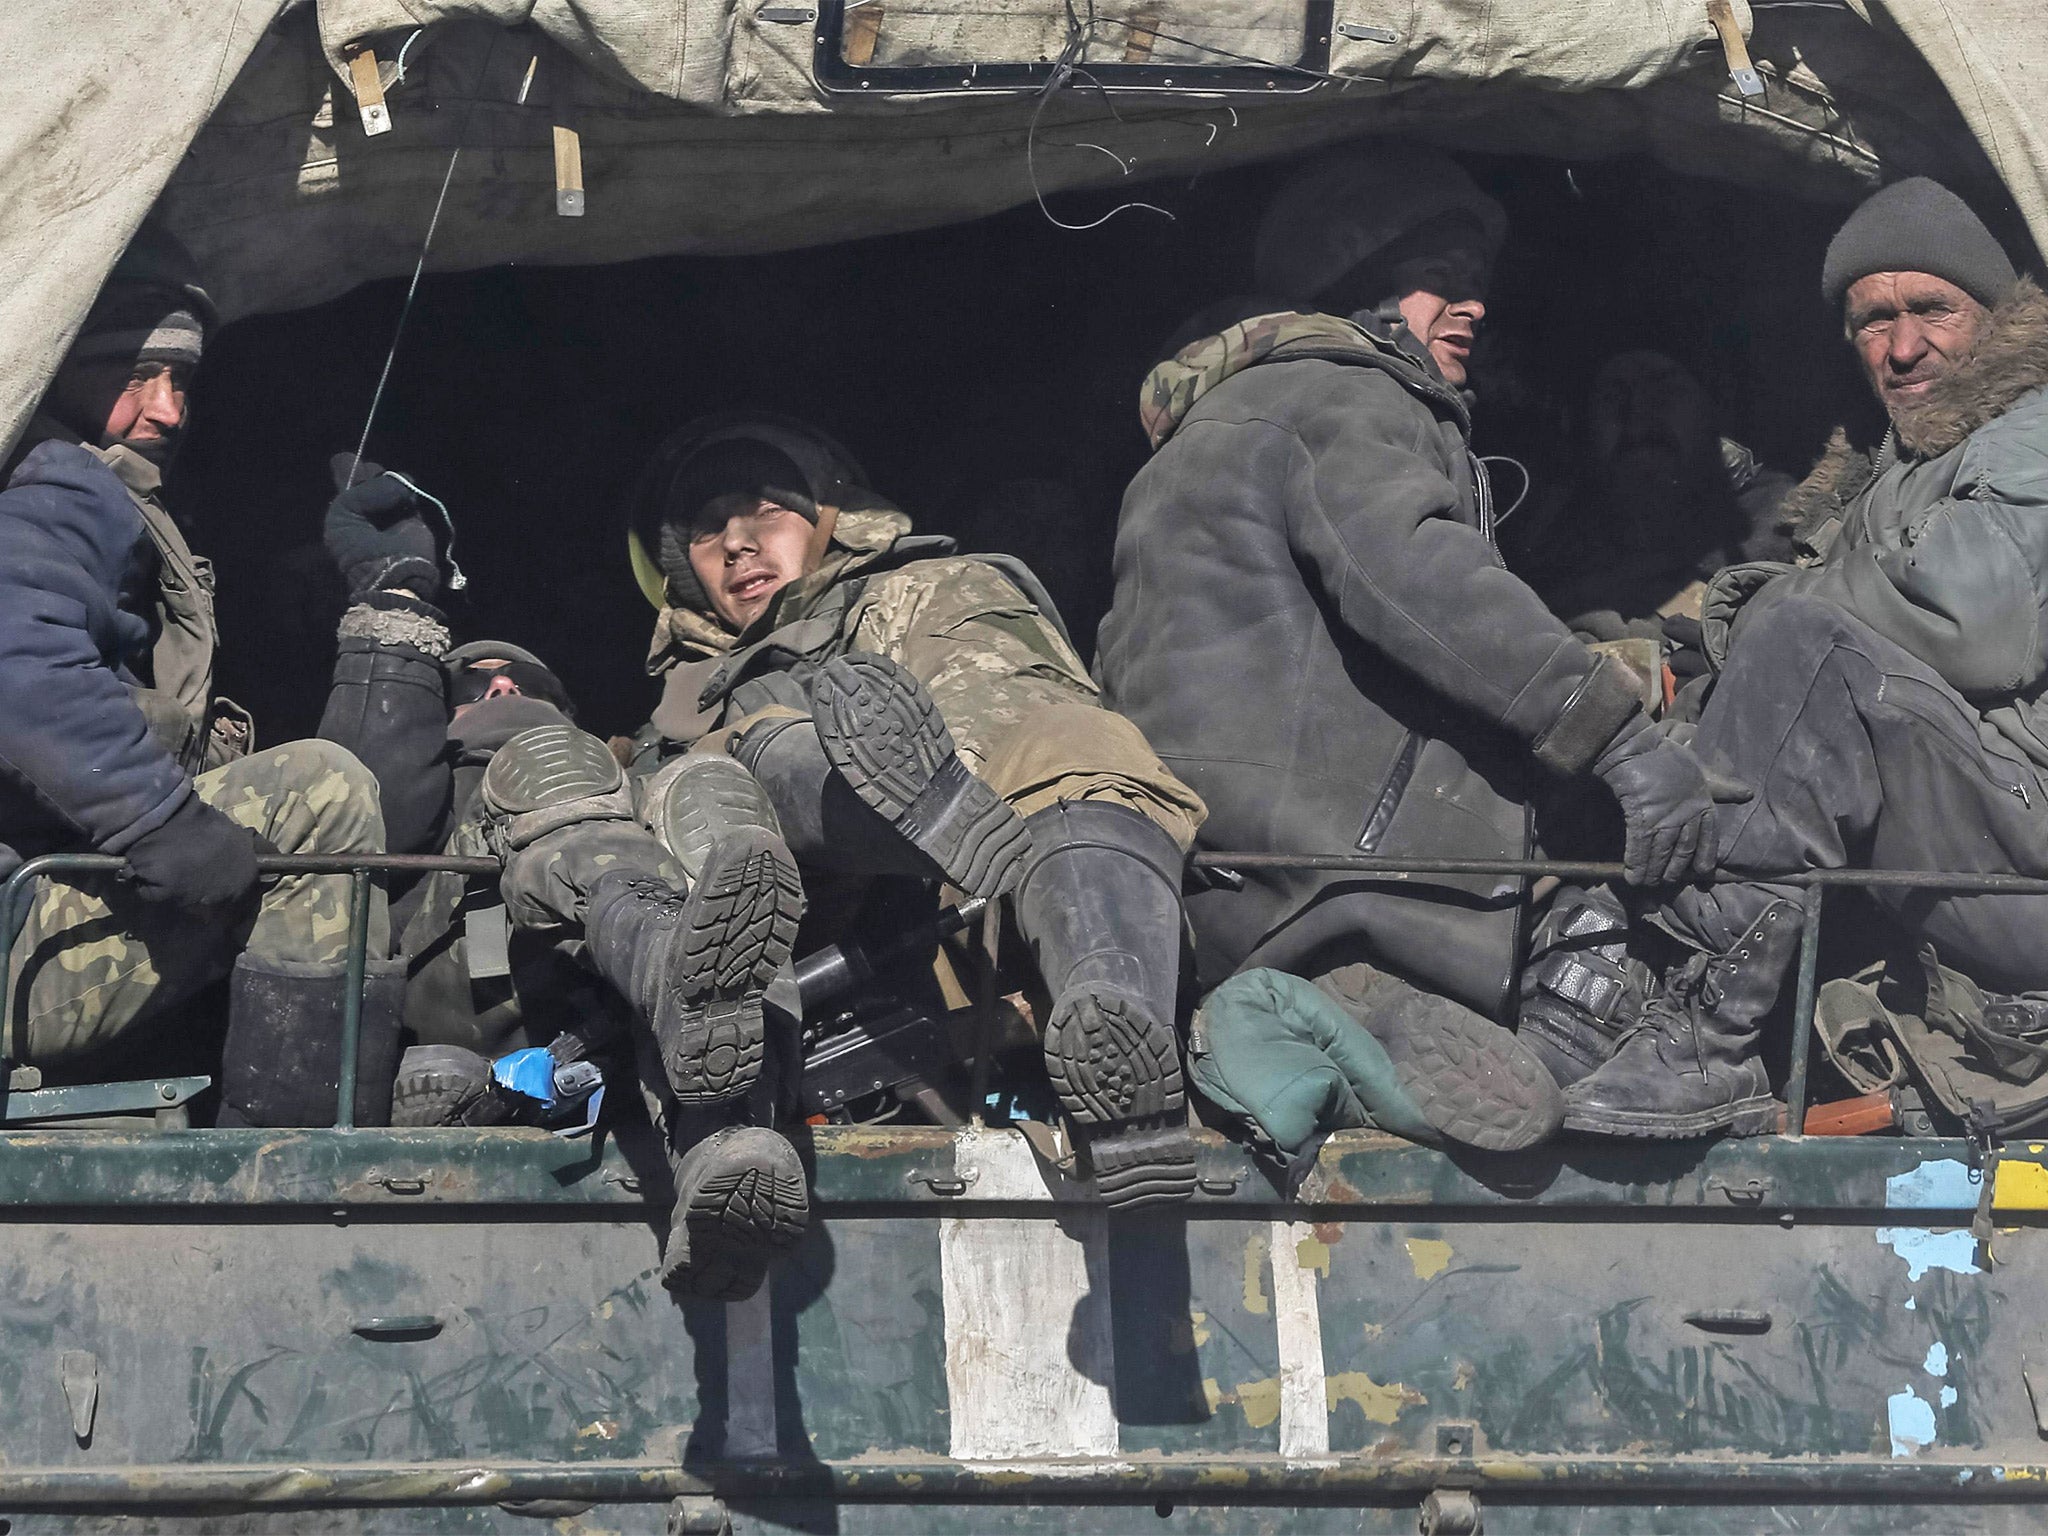 Weary Ukrainian servicemen leave the area around the besieged town of Debaltseve in eastern Ukraine on Wednesday after fierce combat with pro-Russian rebels